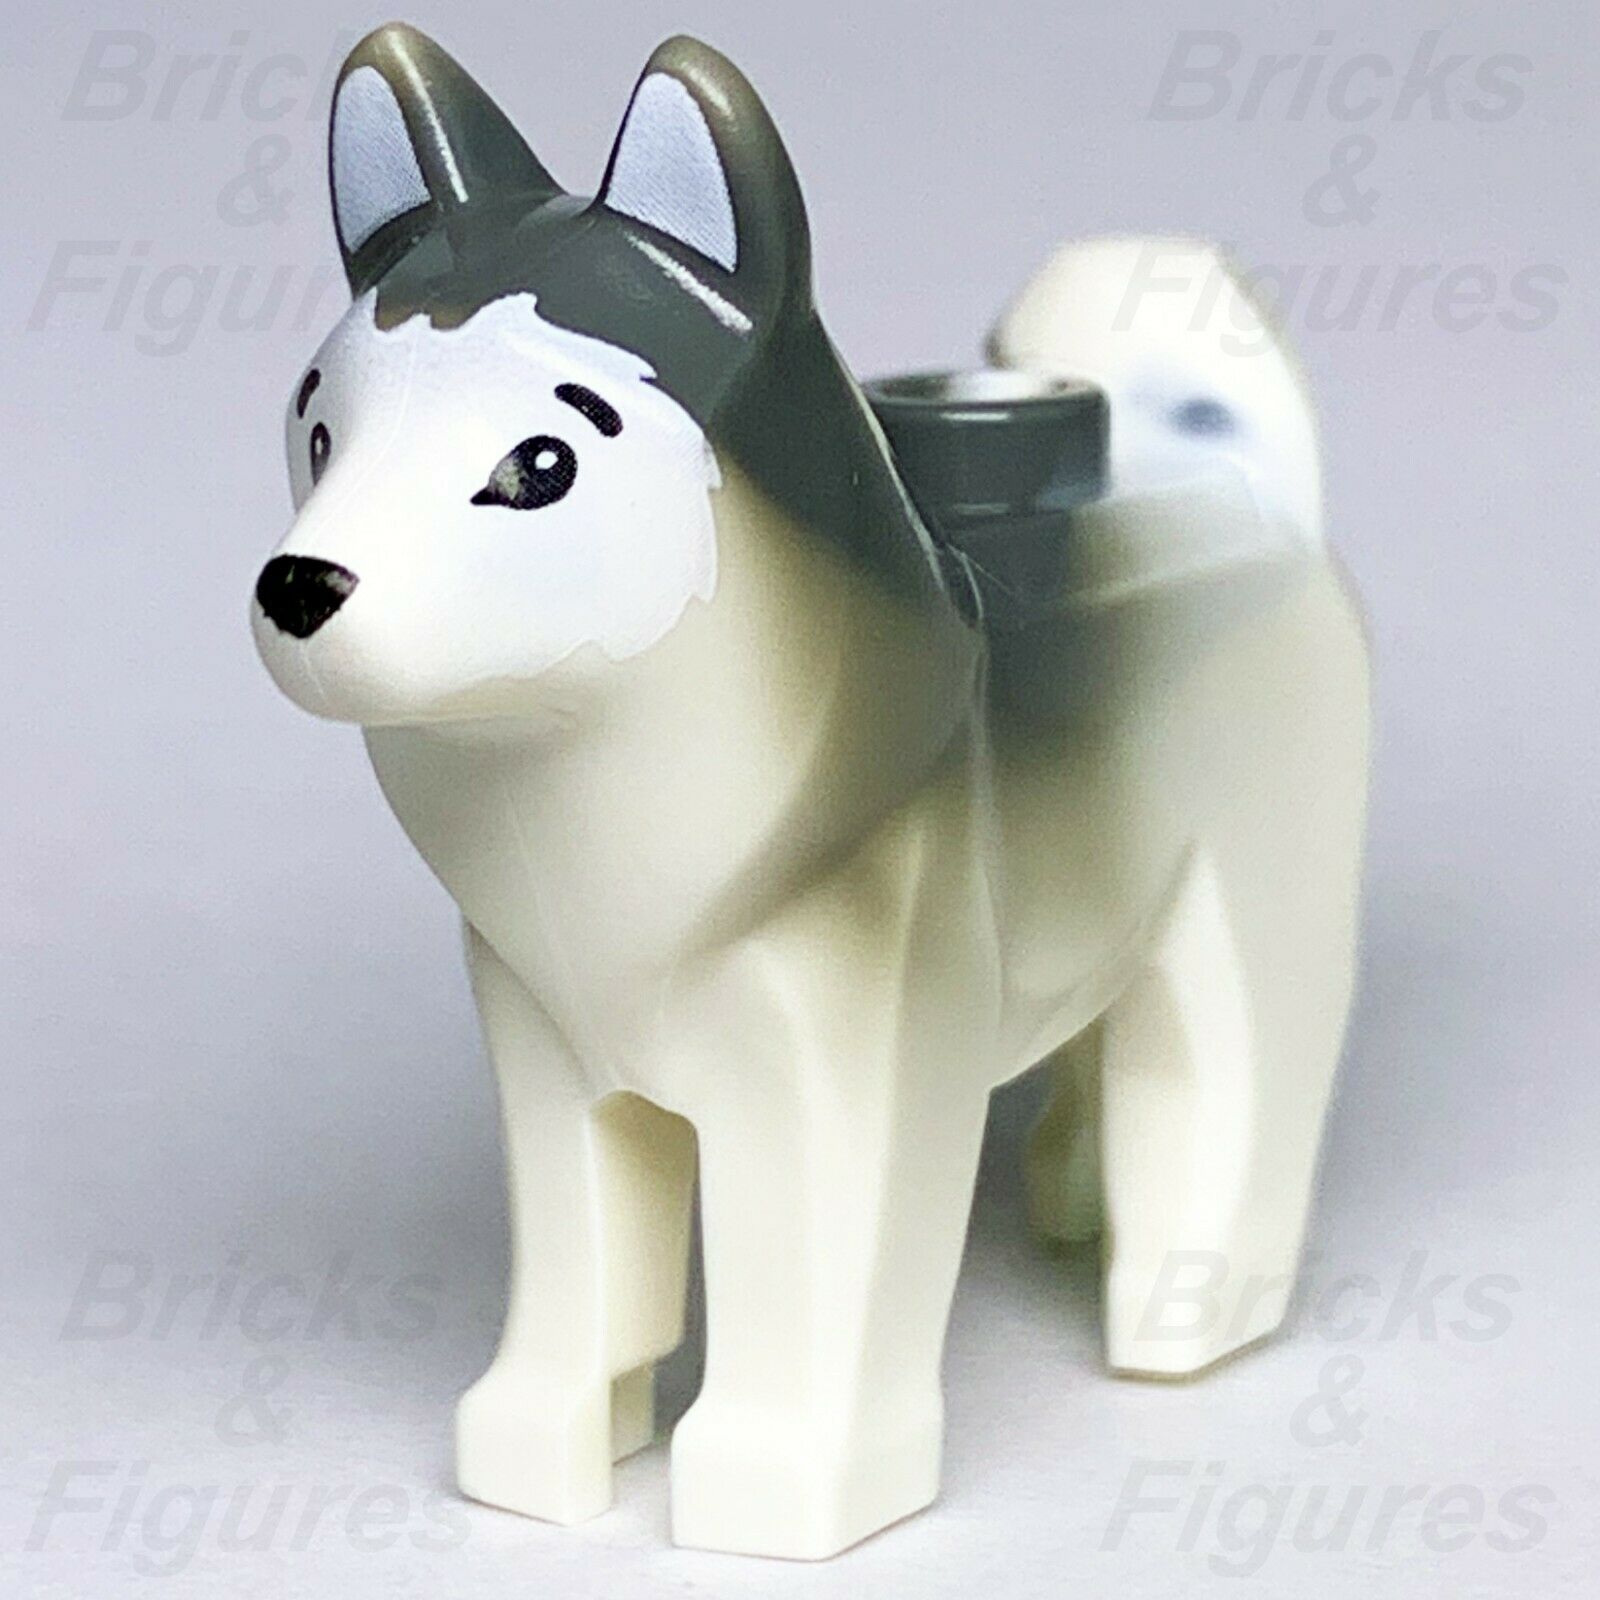 New Town Holiday & Event LEGO Husky Dog Animal from sets 60191 60194 60133 - Bricks & Figures